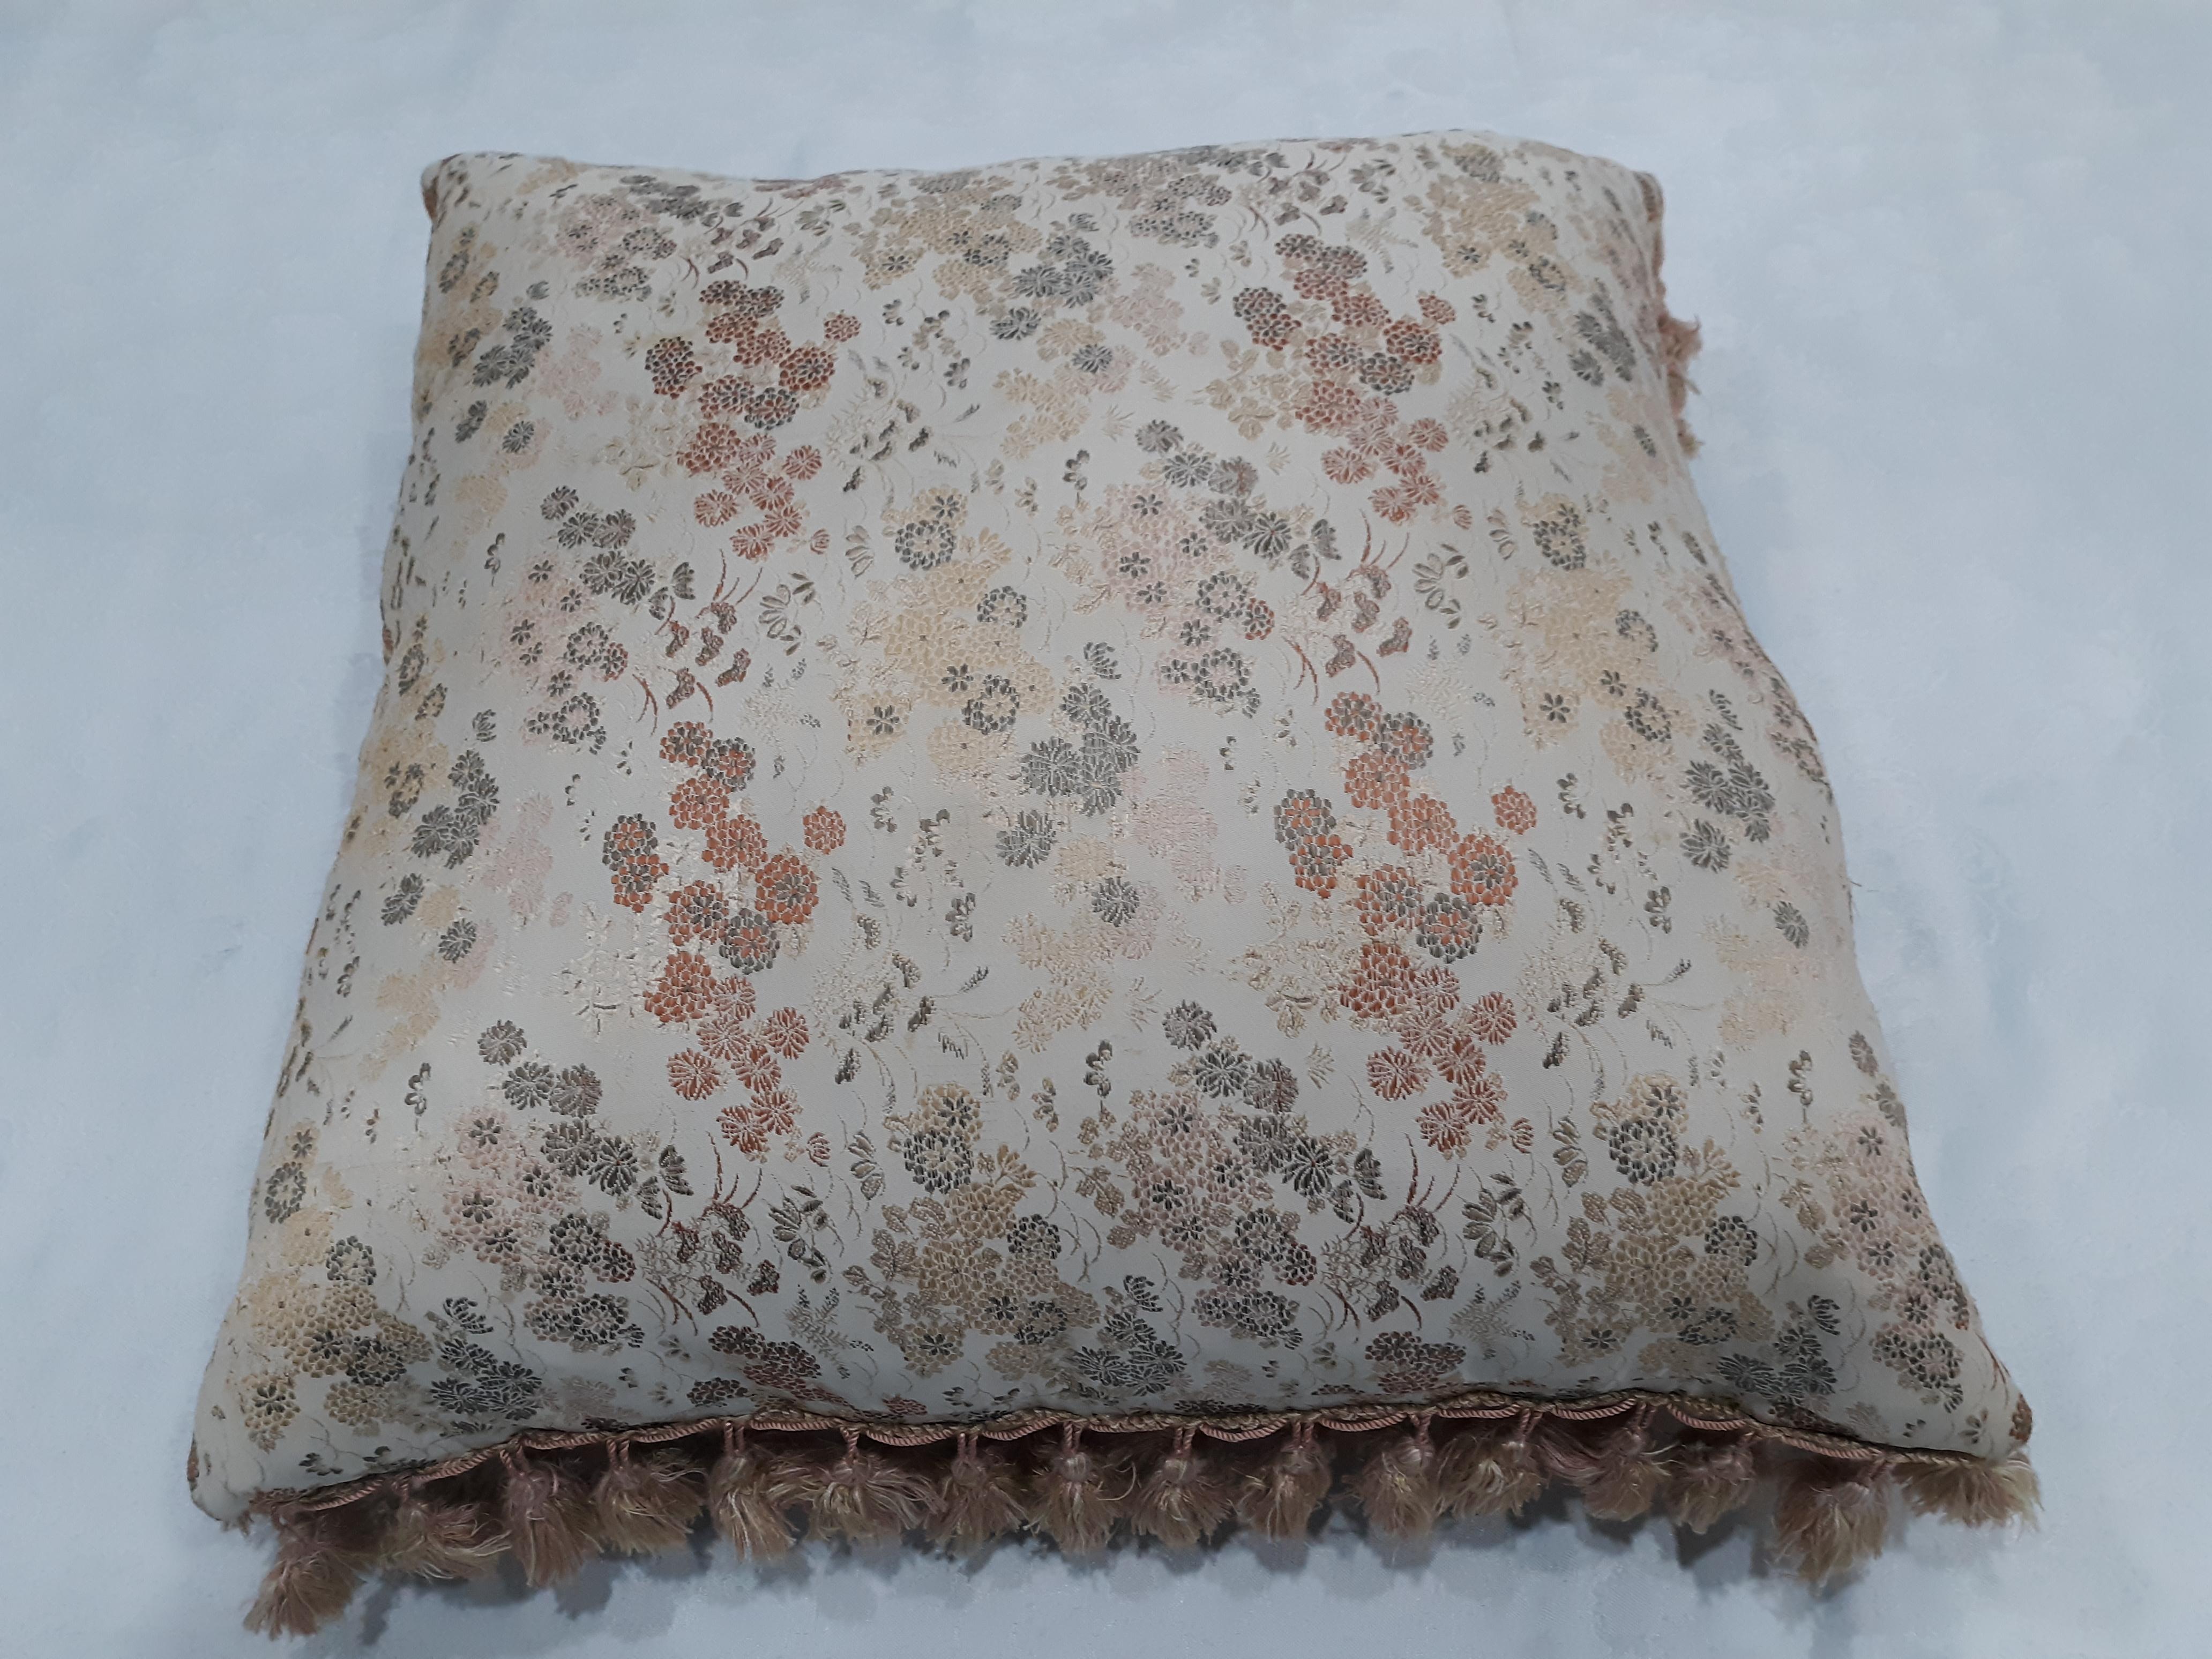 Amazing deal on these embroidered cushions. These are absolutely beautiful, and rare to find. They will make the couch, bed, or sofa on which they are placed.

Good condition.
 